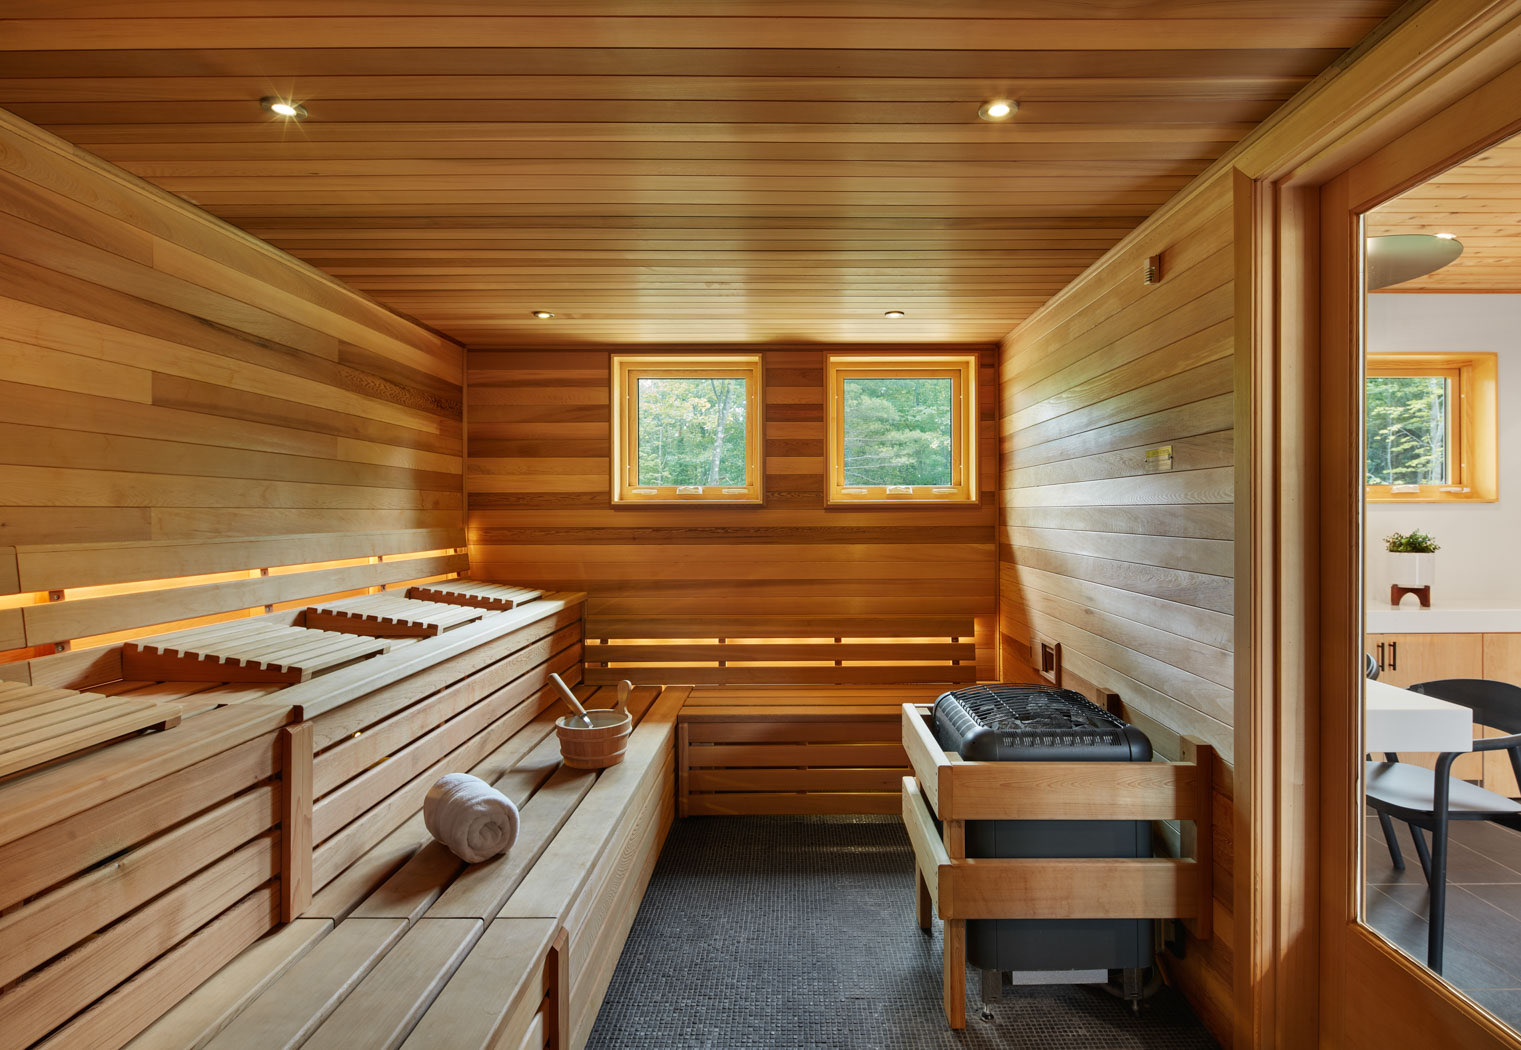 Internal view of a big wooden spa